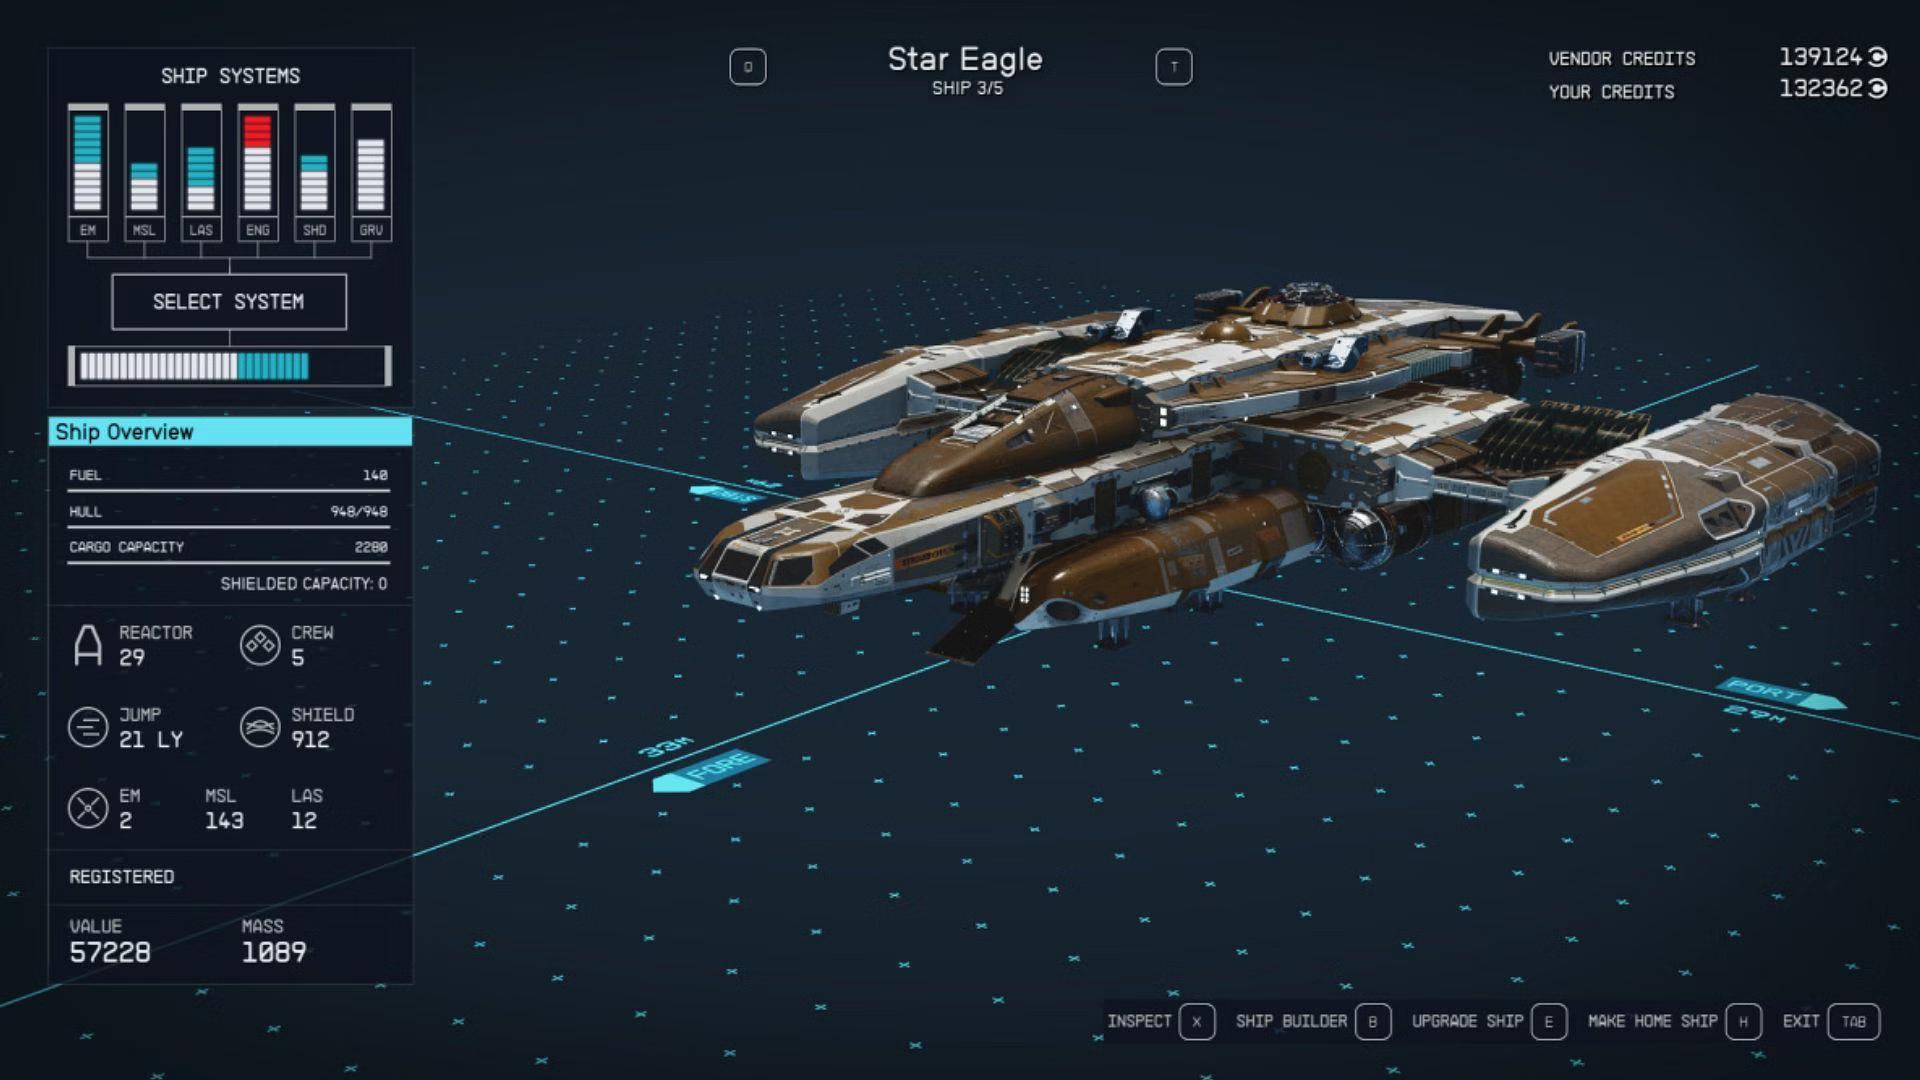 The star eagle ship in Starfield.